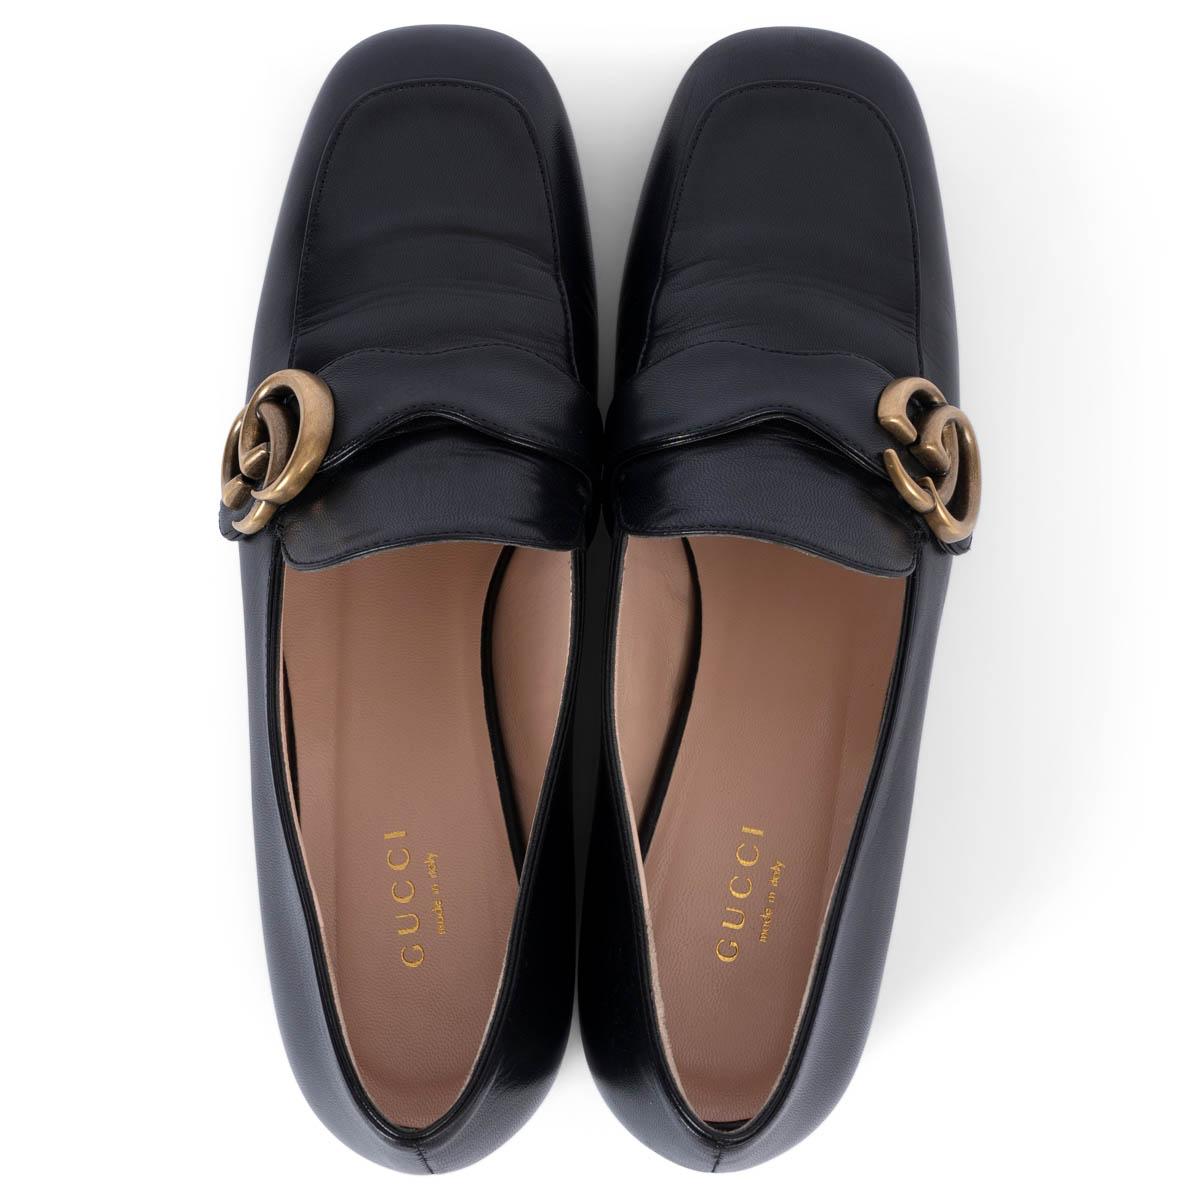 GUCCI black leather GG MARMONT Loafers Shoes 38 1